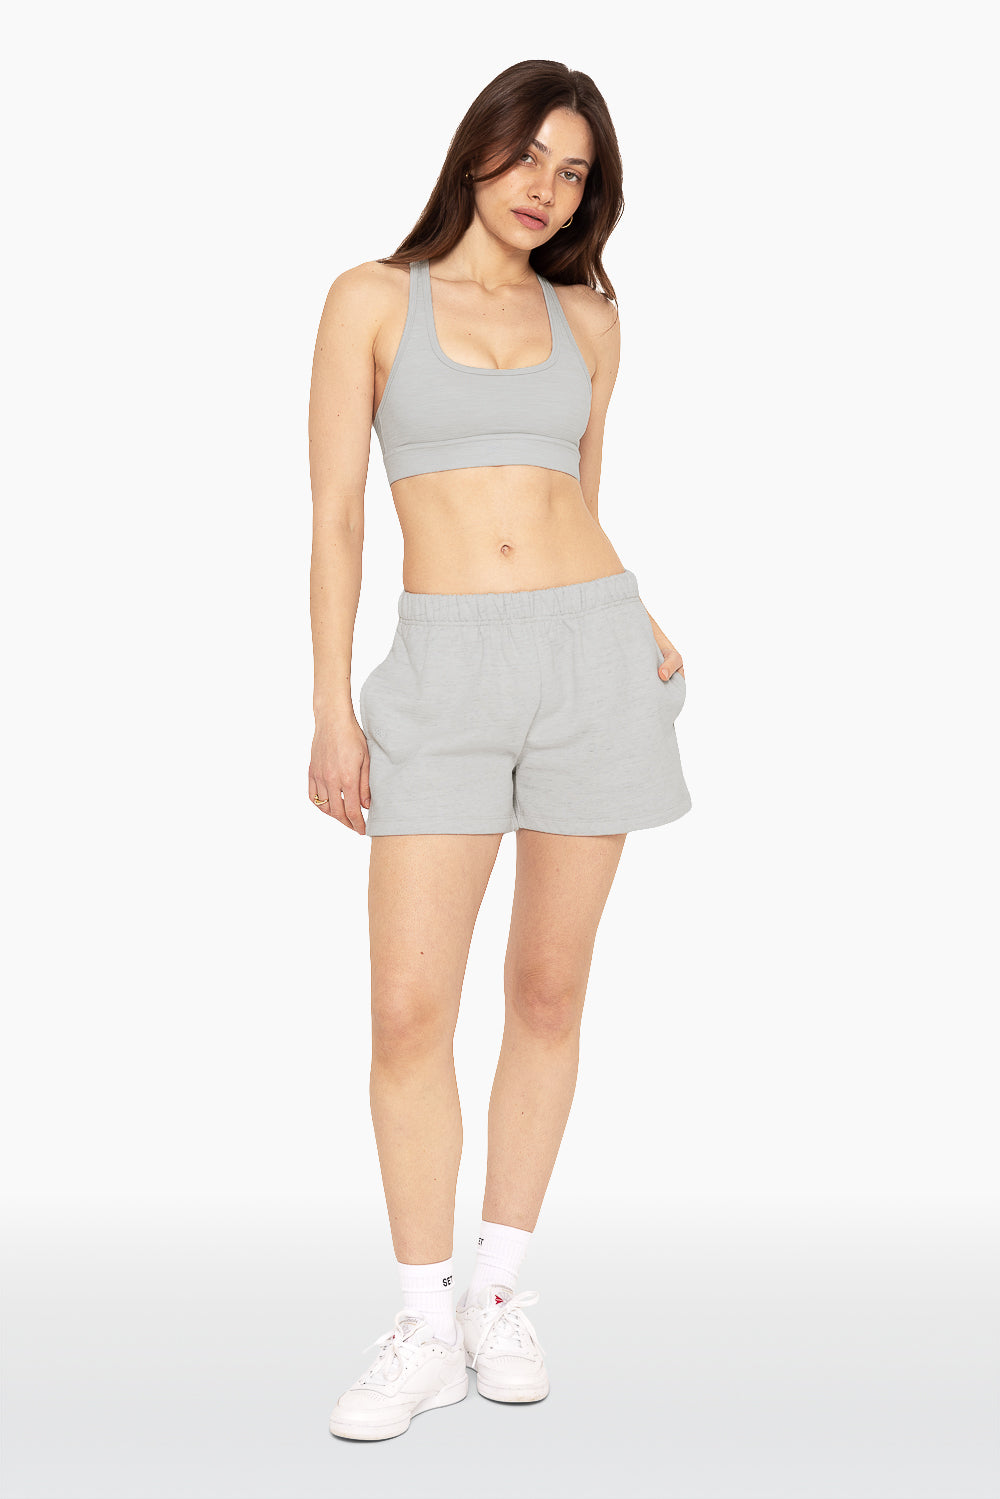 SET™ EMBROIDERED HEAVYWEIGHT SWEATS SWEAT SHORTS IN HEATHER GREY